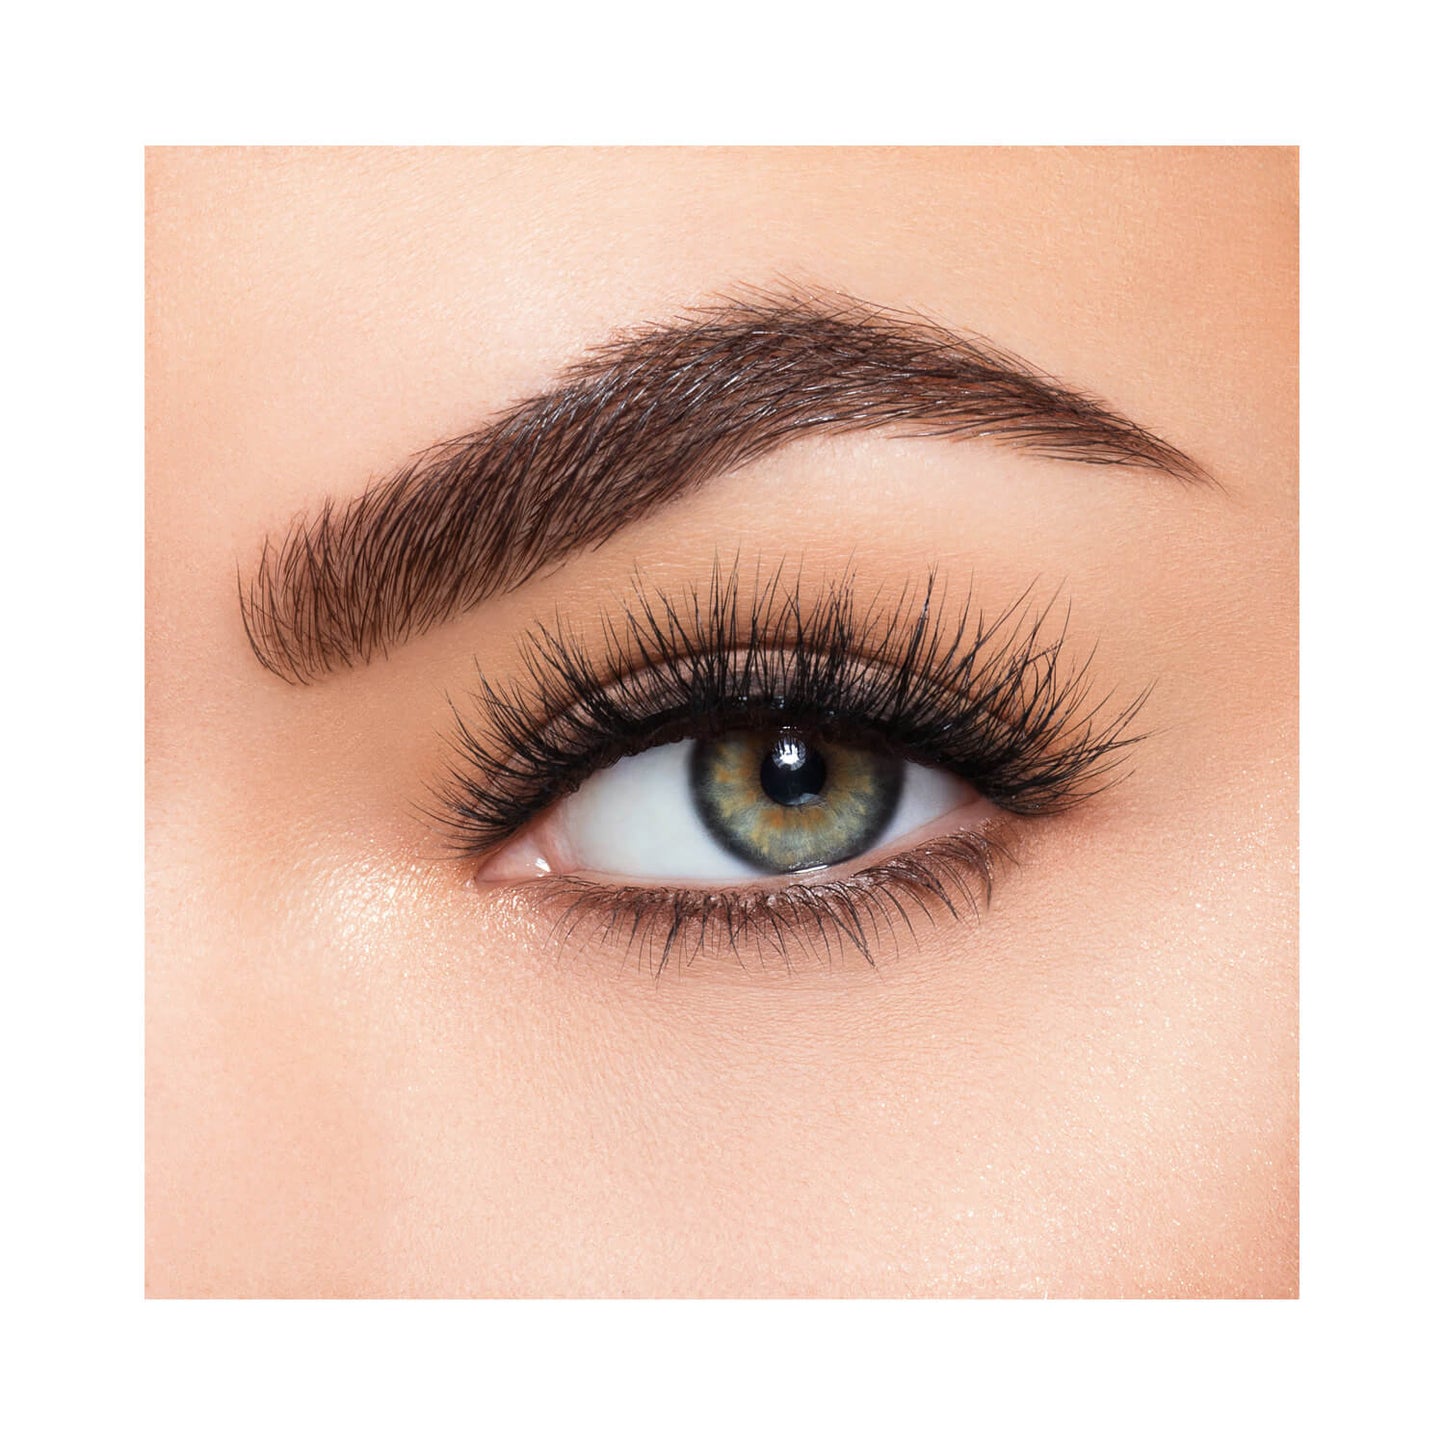 Lilly Lashes Cannes 3D Mink Lashes